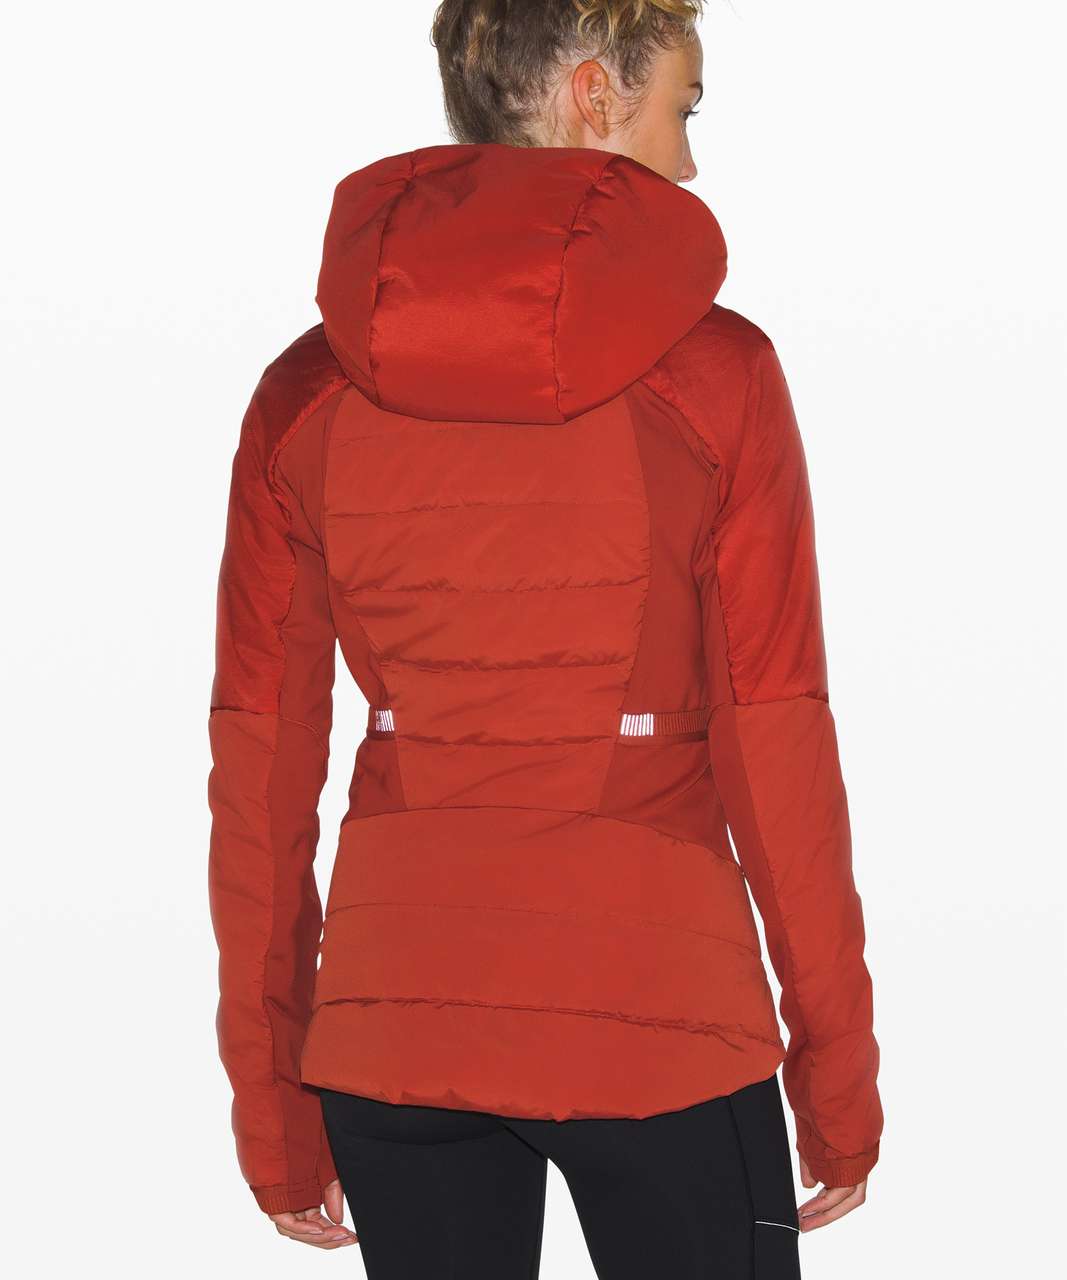 lululemon down for it all jacket size 6